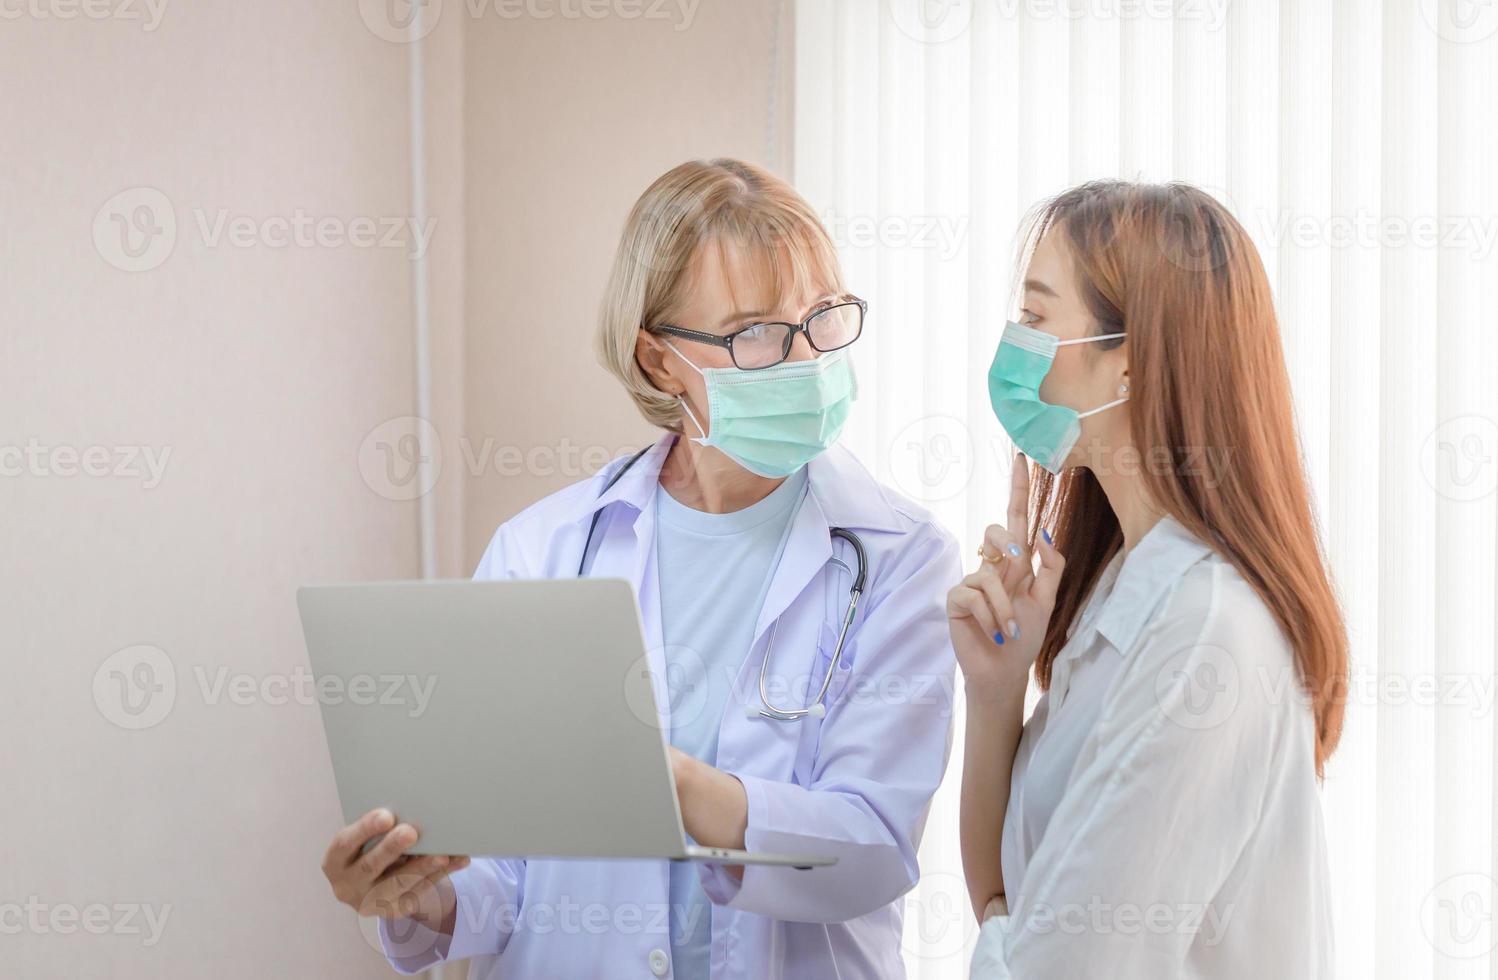 Doctor and patient discussing something while standing at a hospital. Medicine and health care concepts photo